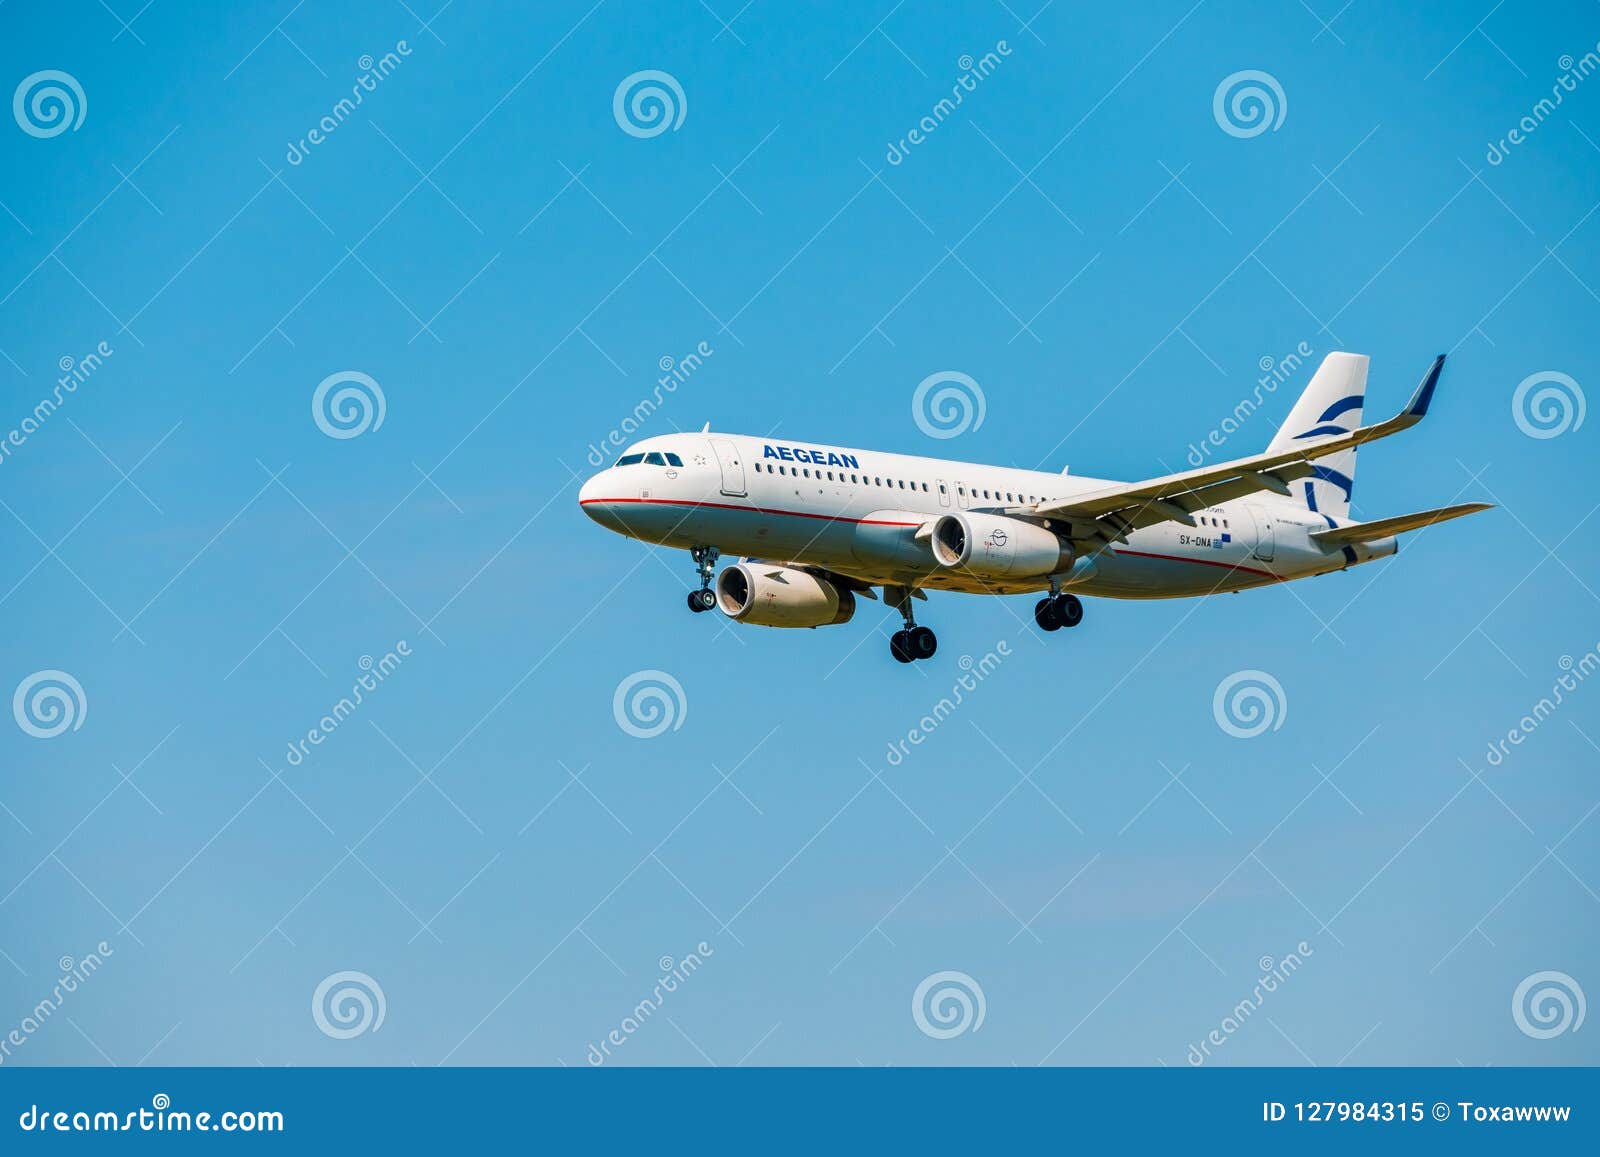 Aegean Airlines Airplane Preparing For Landing At Day Time